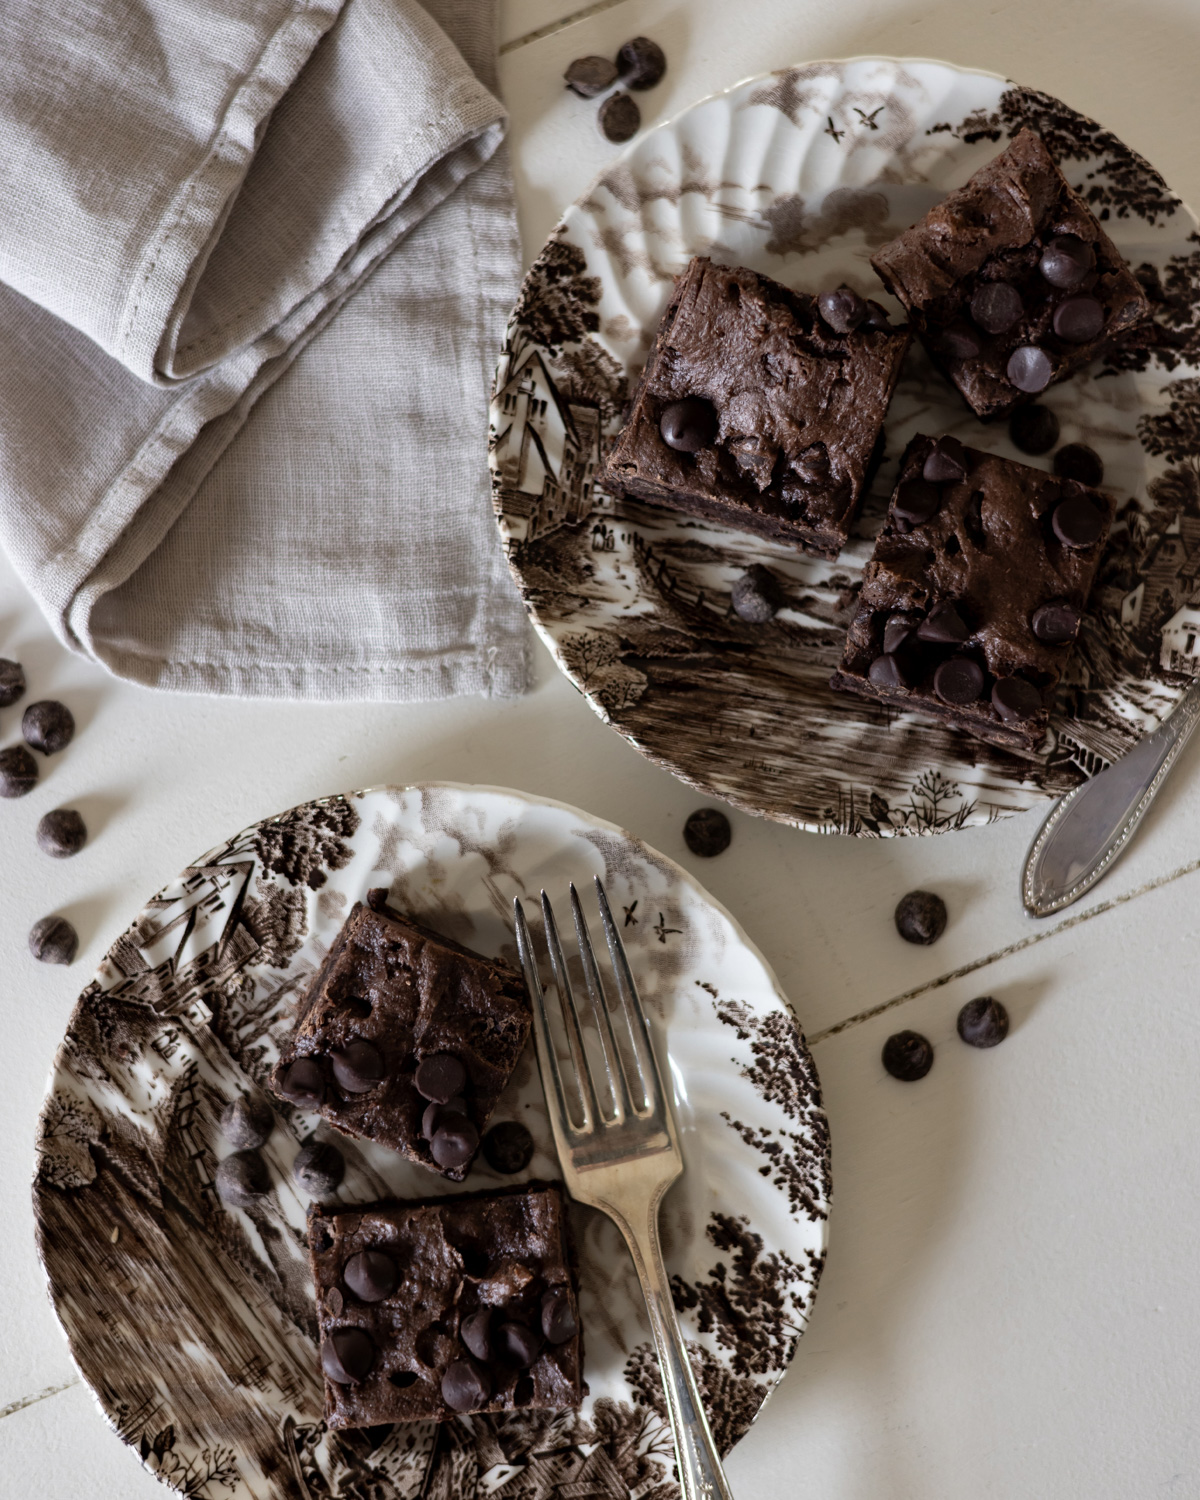 Homemade brownies on brown transfer ware with antique silver forks and linen napkin.